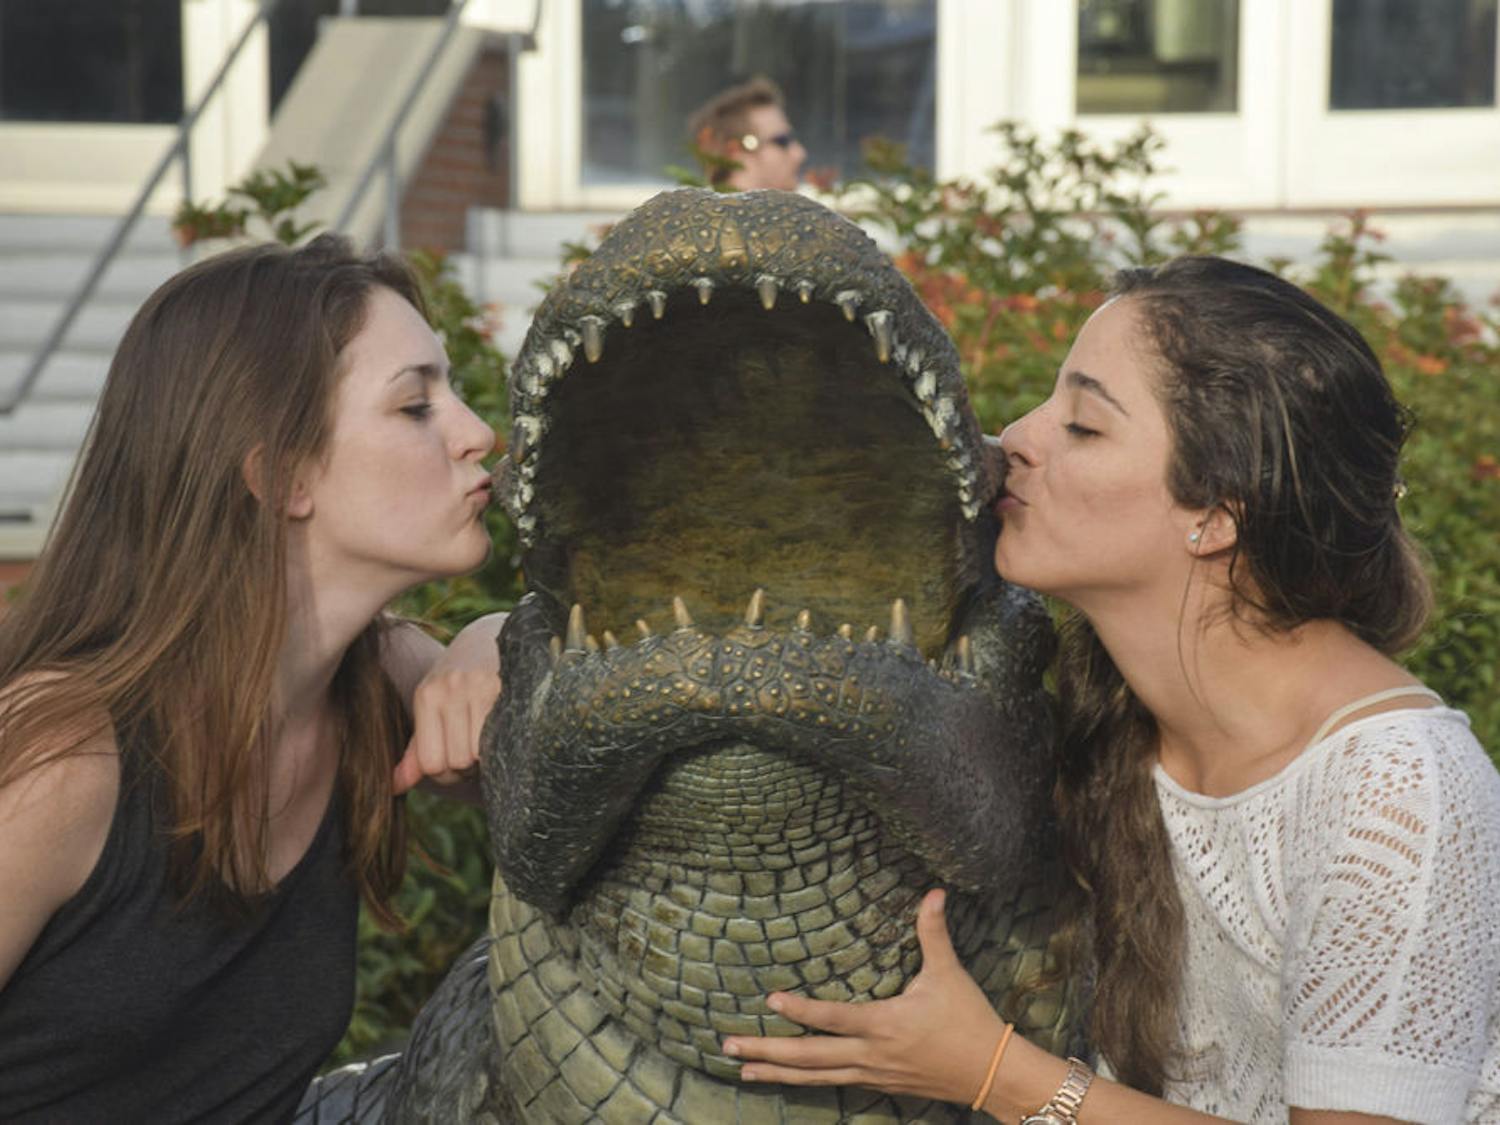 Sydney Folsom, left, 23, and Sophia Saportas, 24, both UF civil engineering seniors, pose with the Bull Gator statue outside Ben Hill Griffin Stadium. Saportas said she’s very happy to finish her university years. “It’s about time,” Folsom said.